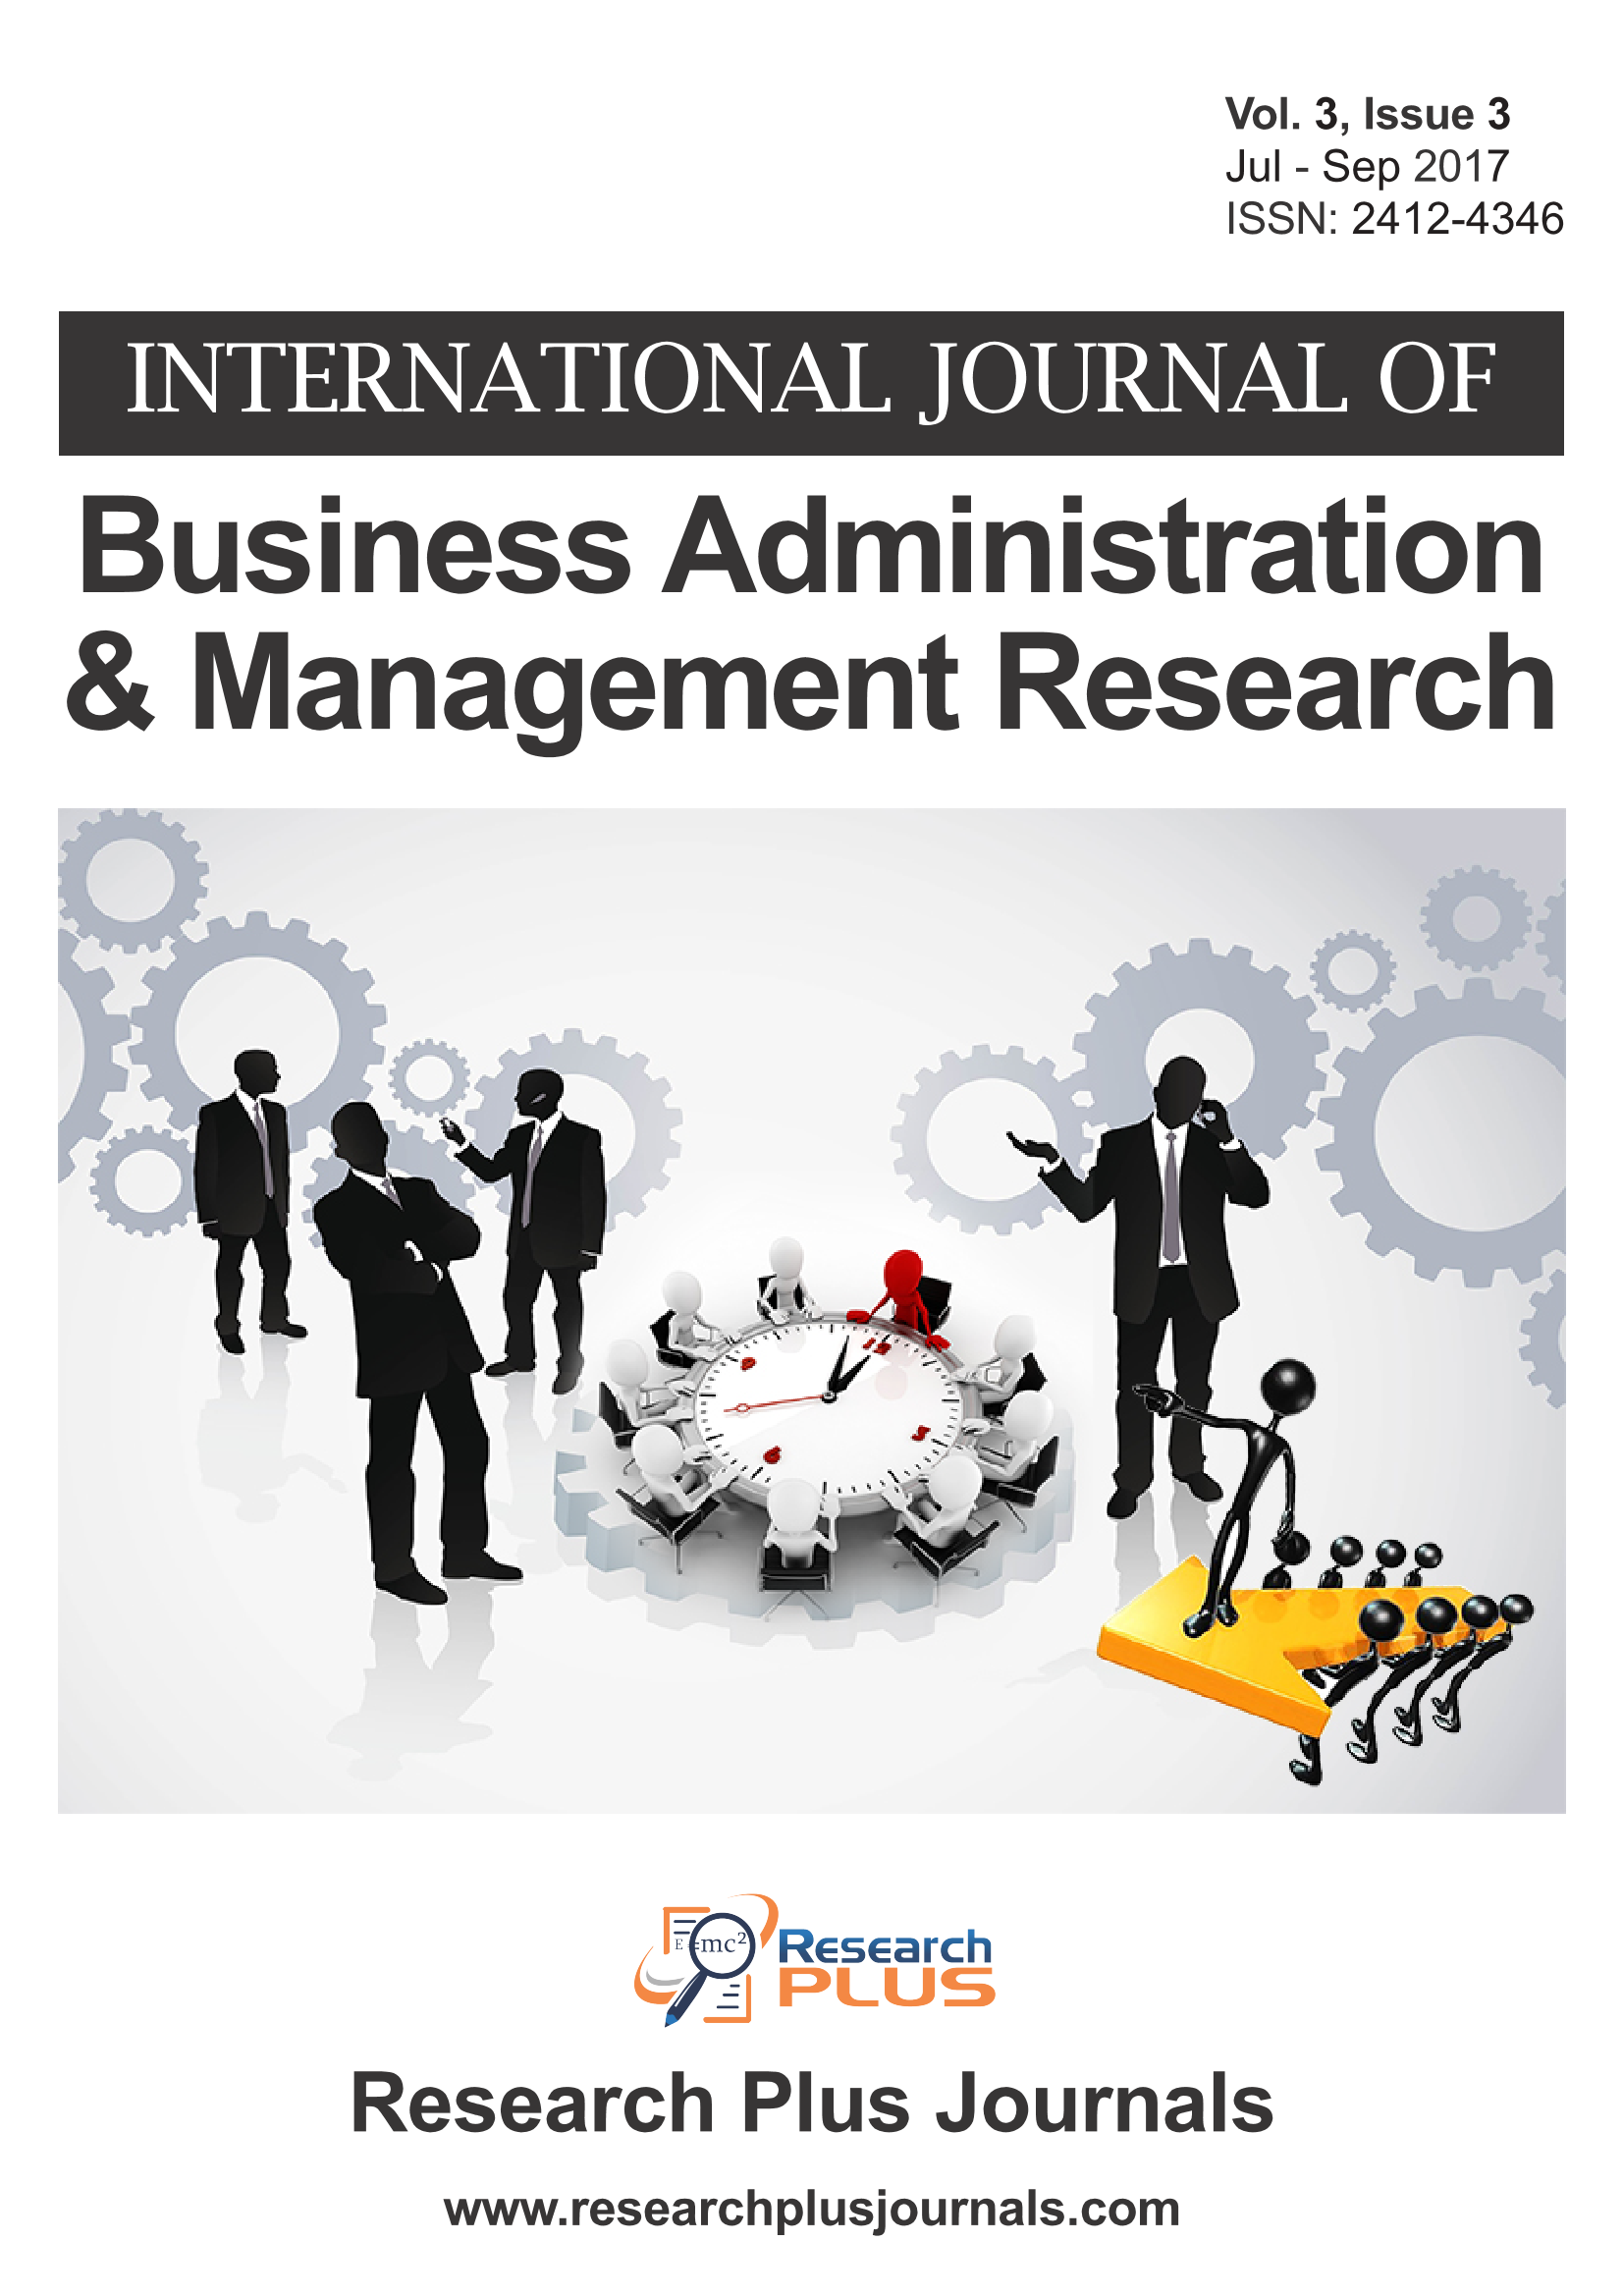 Volume 3, Issue 3, International Journal of Business Administration and Management Research (IJBAMR) (Online ISSN: 2412-4346)